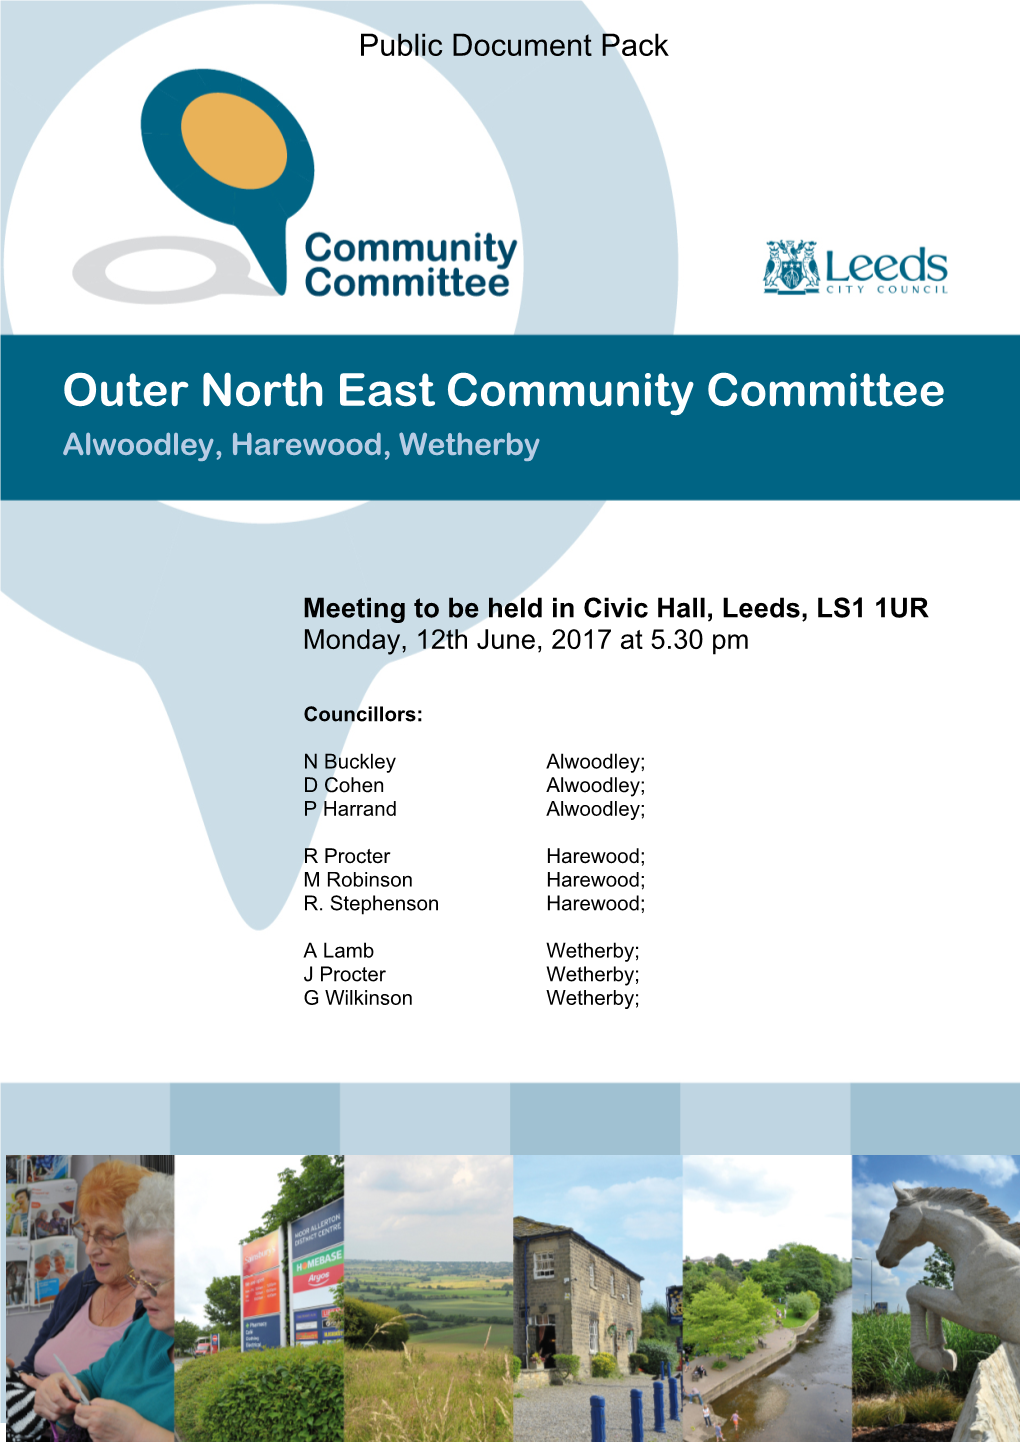 Outer North East Community Committee Alwoodley, Harewood, Wetherby